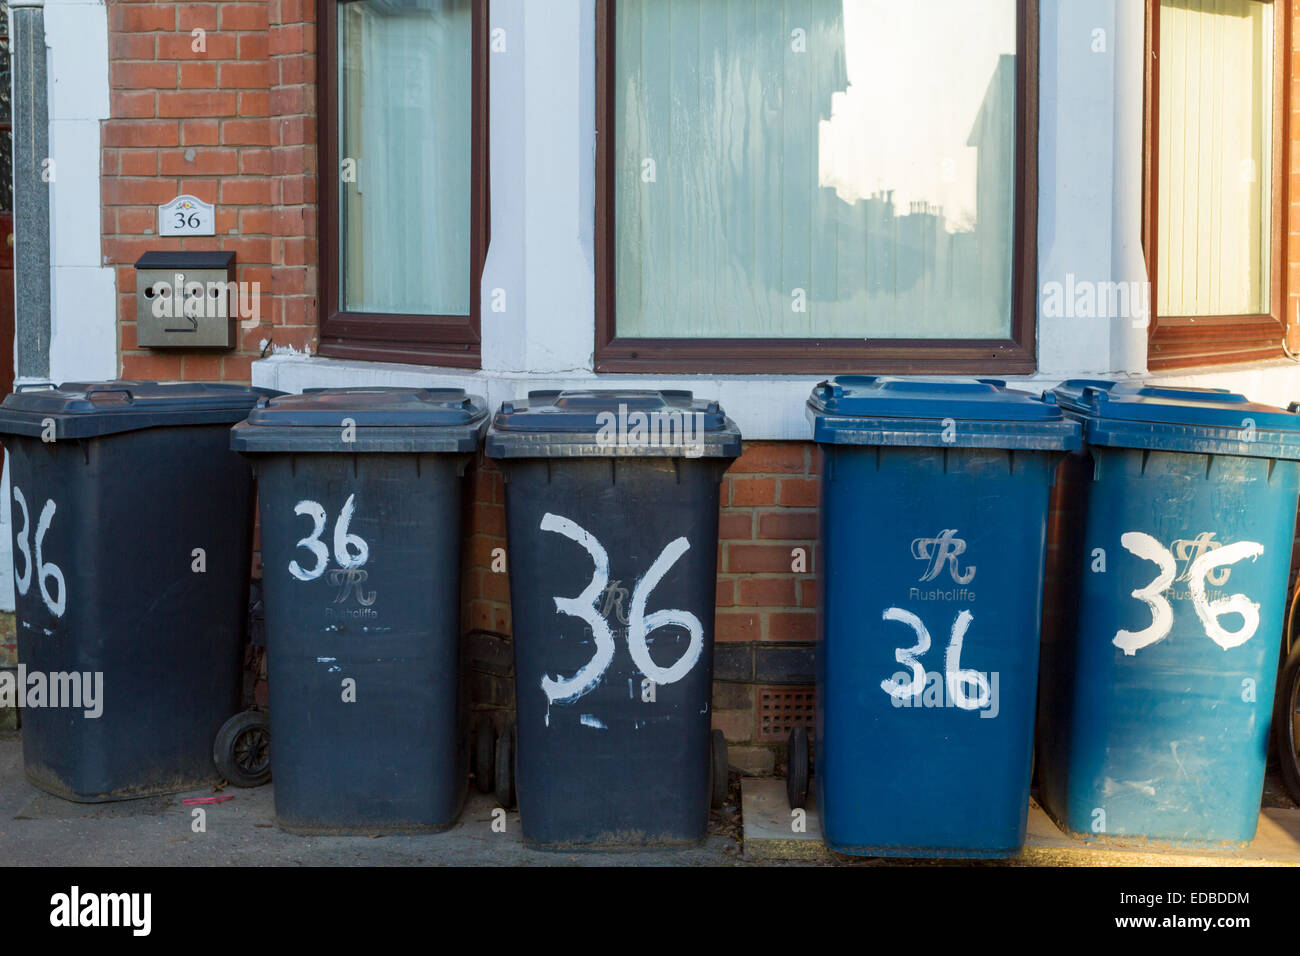 Five wheelie bins with painted numbers at a house of multiple occupancy, i.e. housing divided into many flats, Nottinghamshire, England, UK Stock Photo